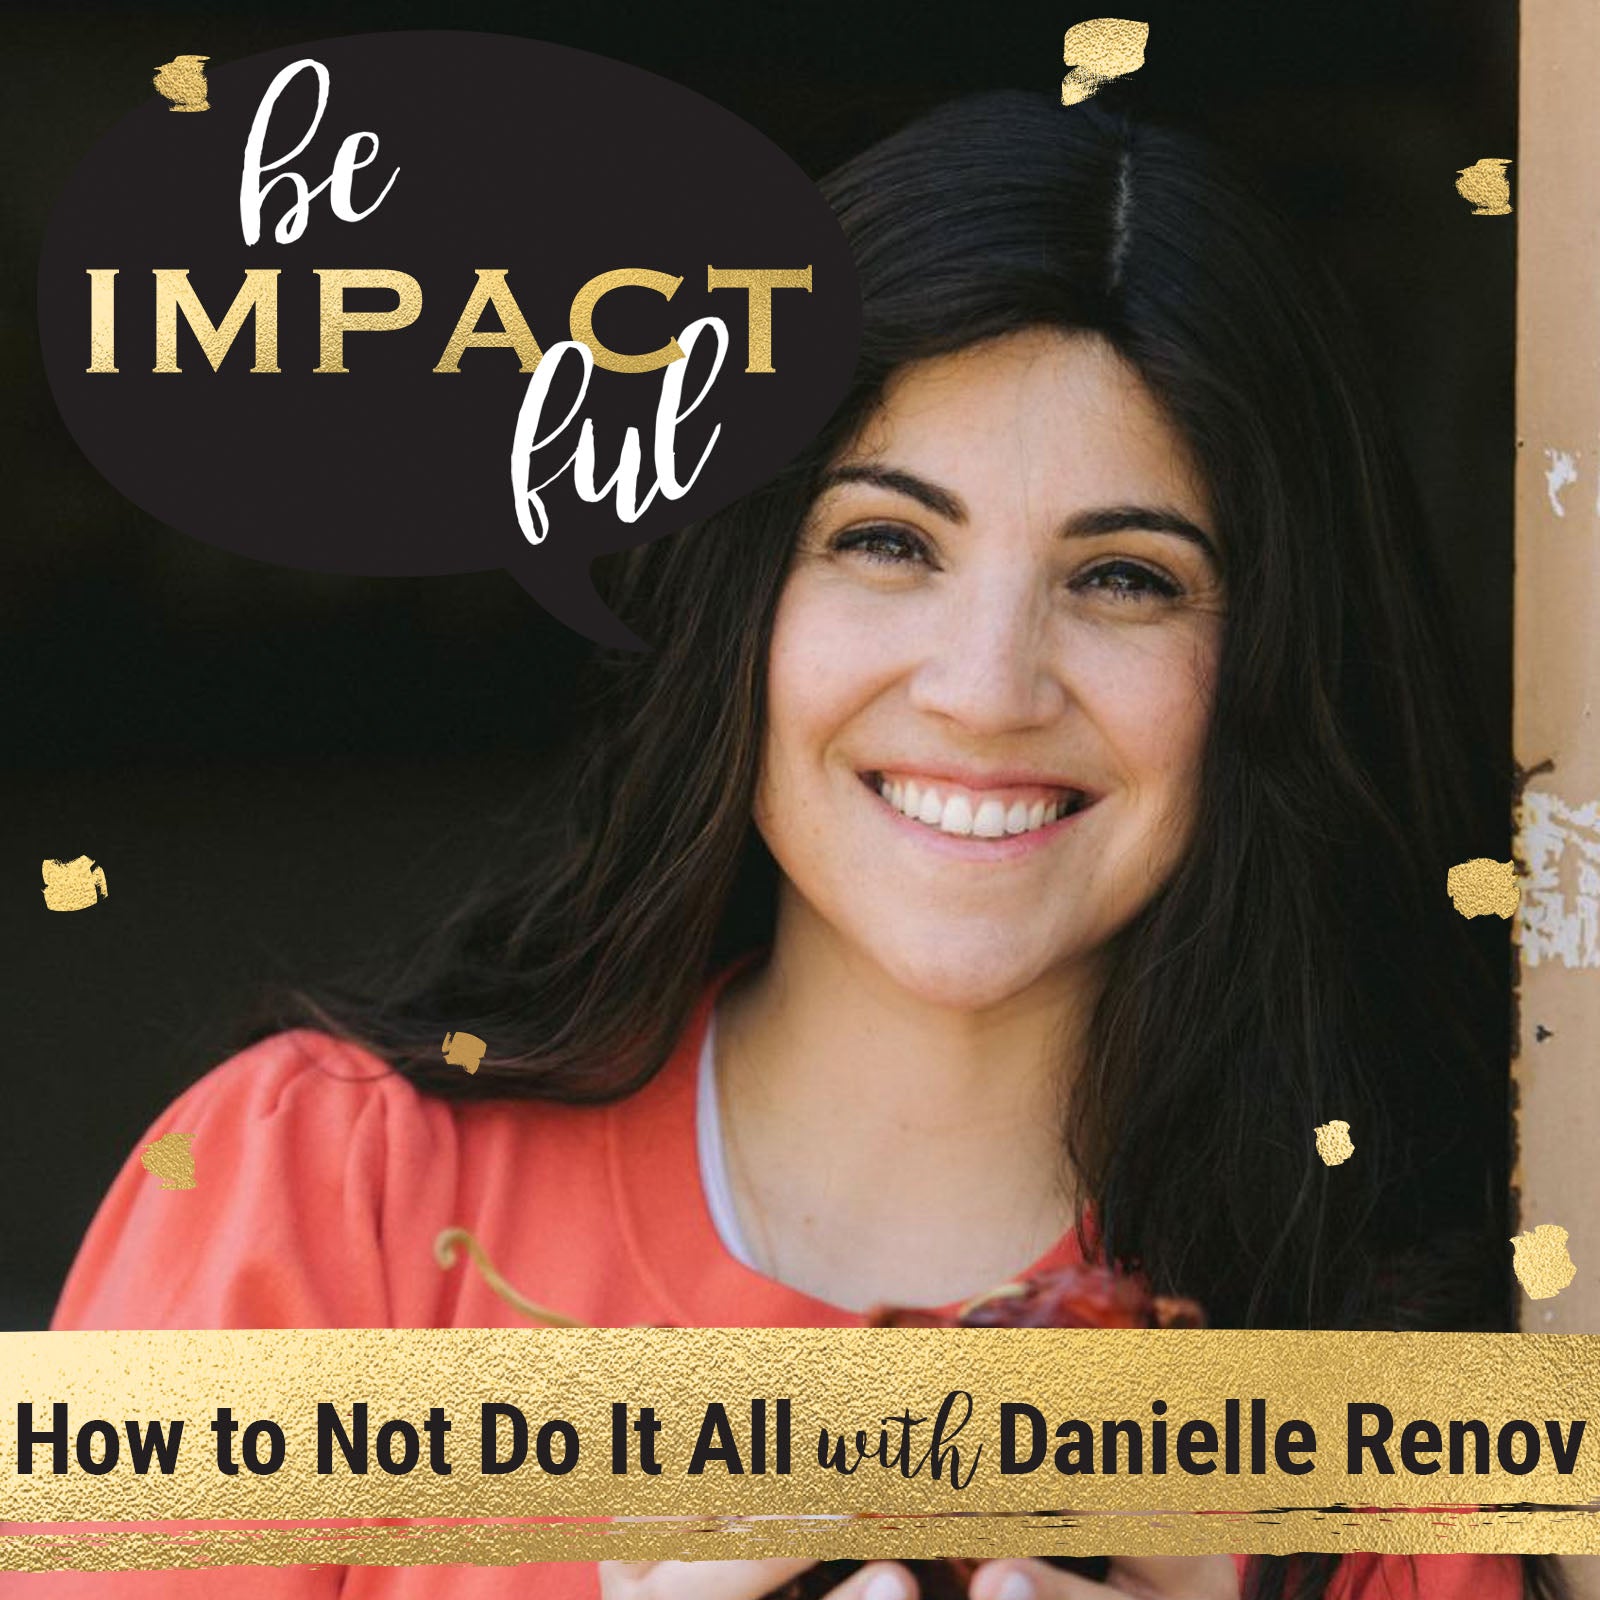 How to Not Do It All with Danielle Renov